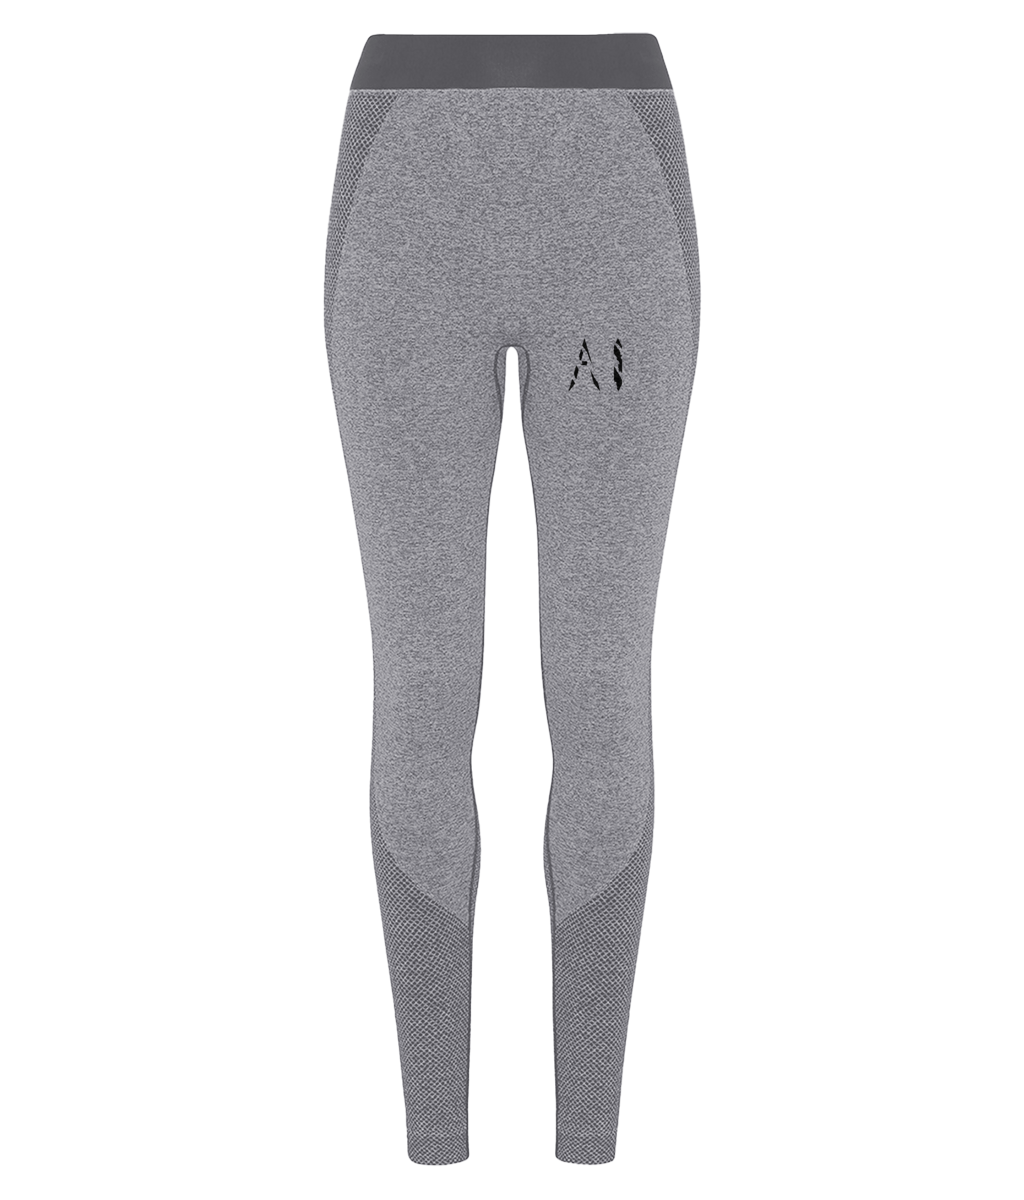 Womens charcoal Athletic Seamless Sports Leggings with black AI logo on upper thigh